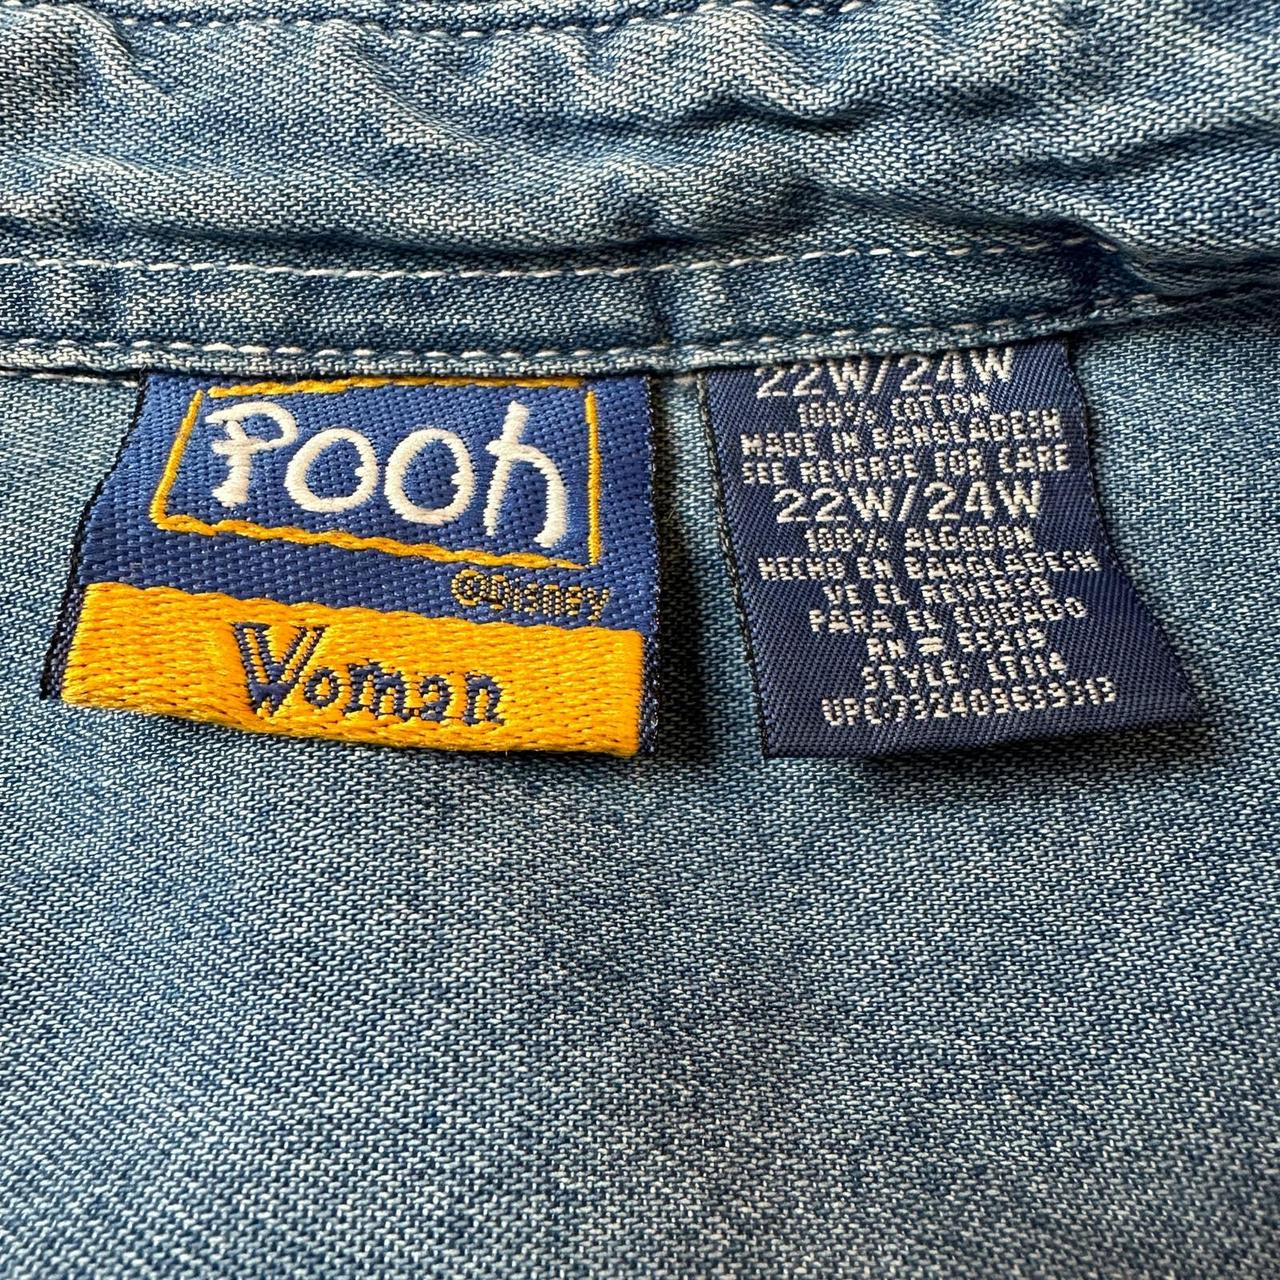 This adorable vintage Winnie the Pooh piece is a - Depop